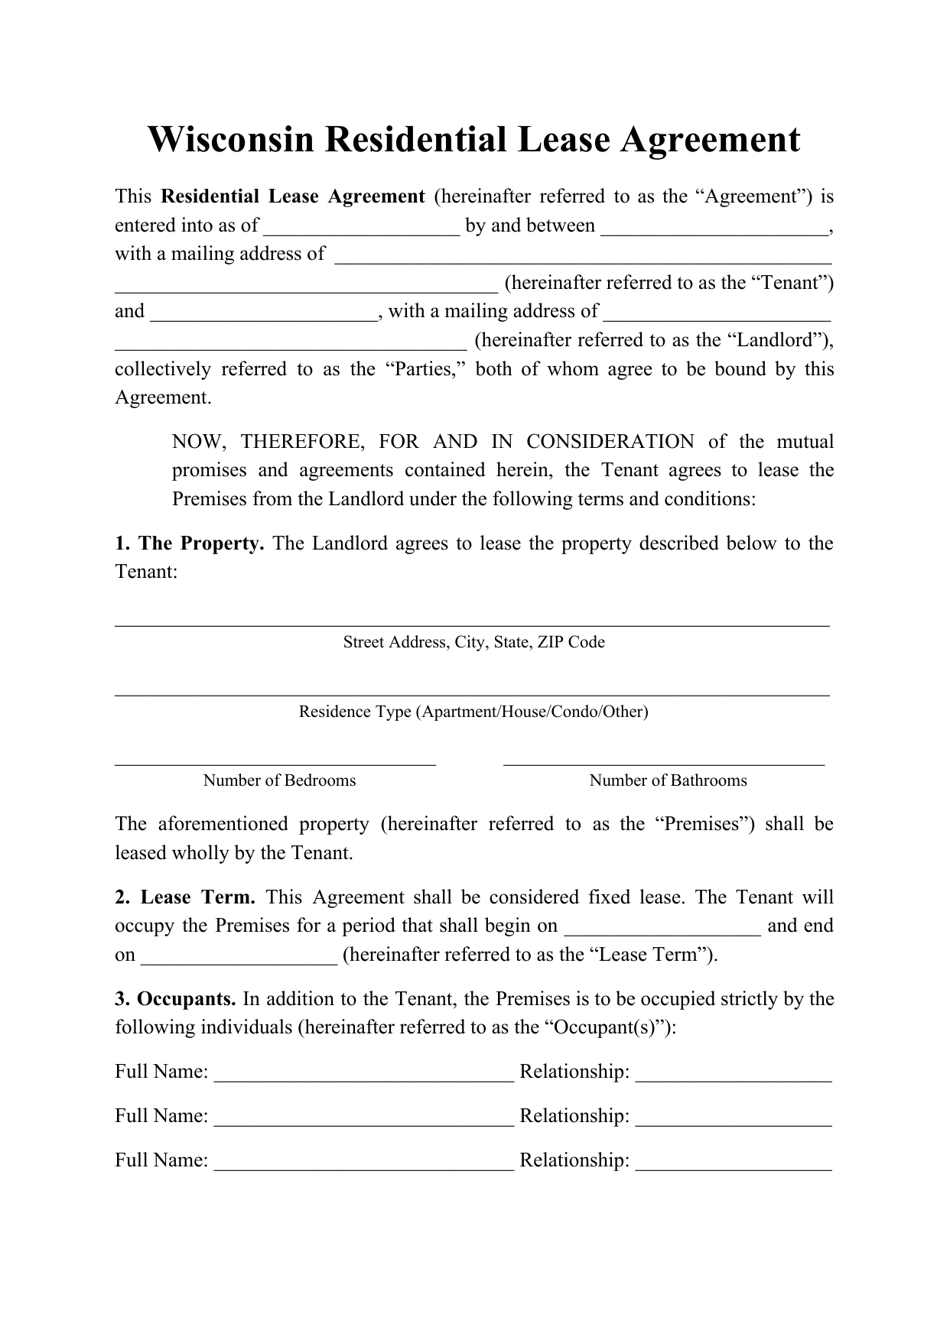 Residential Lease Agreement Template - Wisconsin, Page 1